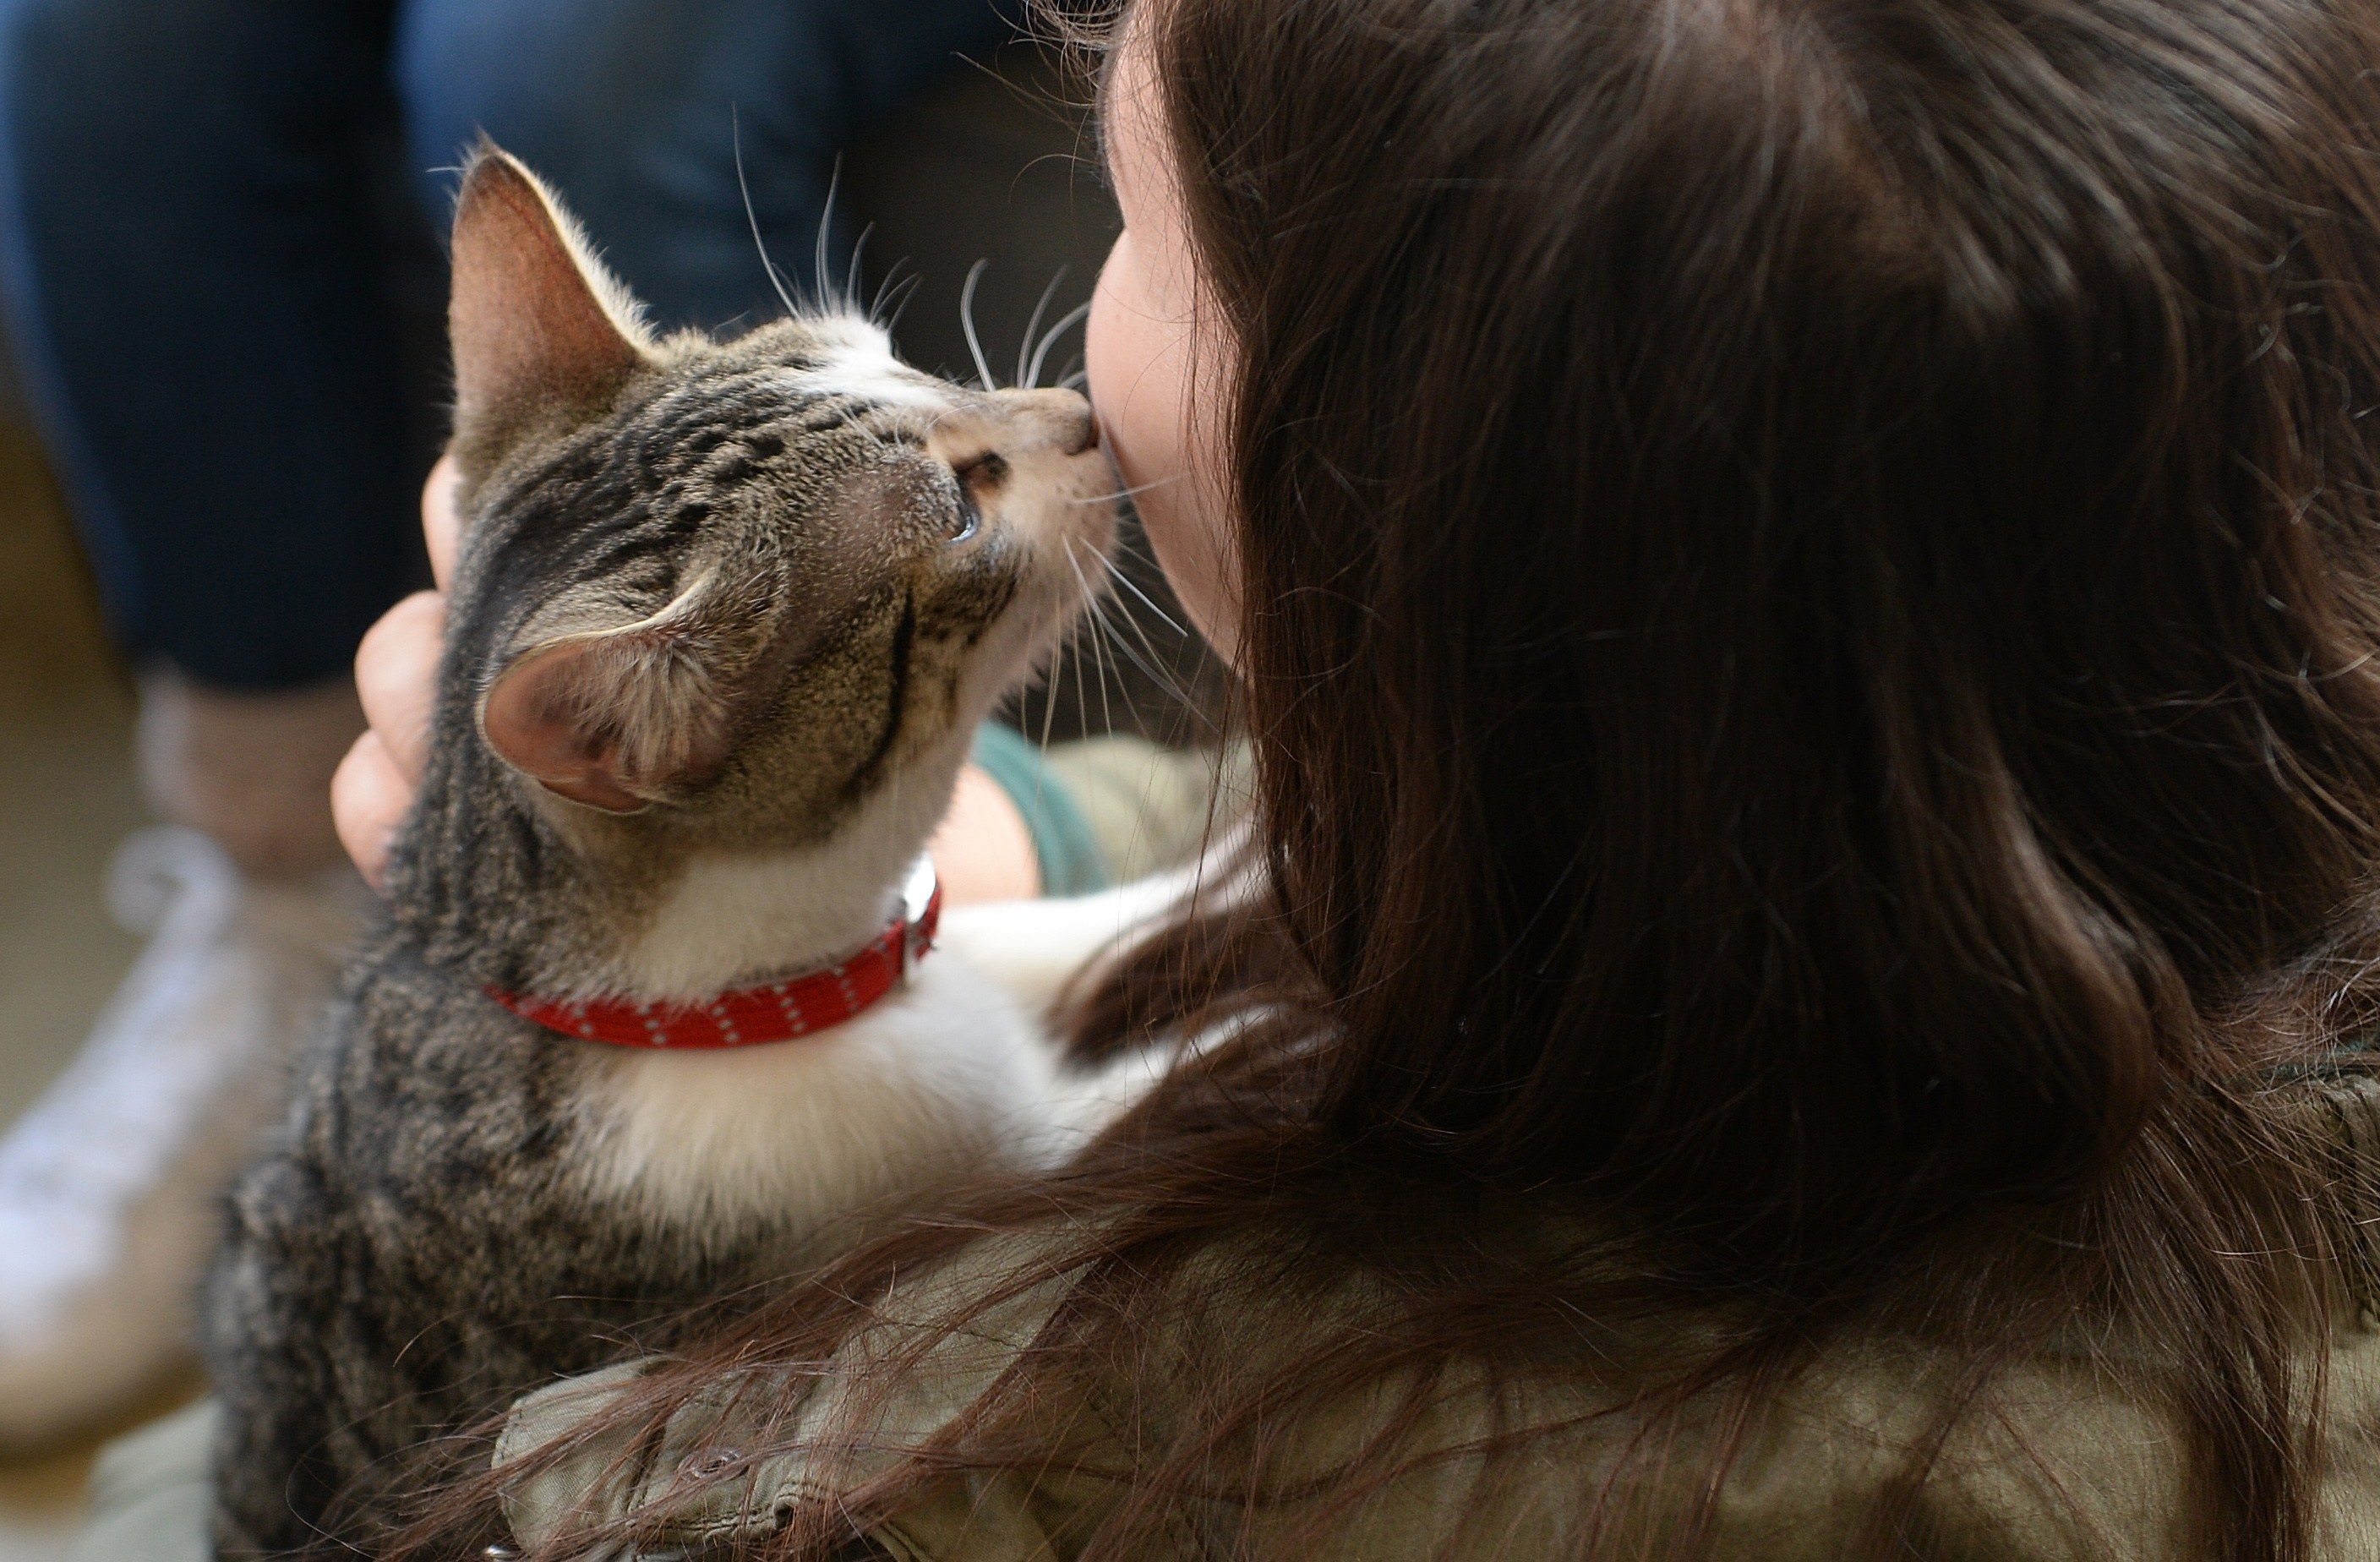 A visitor pets a cat at the pop-up "Cat cafe", a cafe where patrons can interact and adopt cats, in New York, April 25, 2014. Cat Cafe, a pop up cafe which opened for only four days until April 27, 2014, allows visitors to have a coffee and interact with 21 cats and adopt one if they want. AFP PHOTO/Emmanuel Dunand (Photo credit should read EMMANUEL DUNAND/AFP/Getty Images)